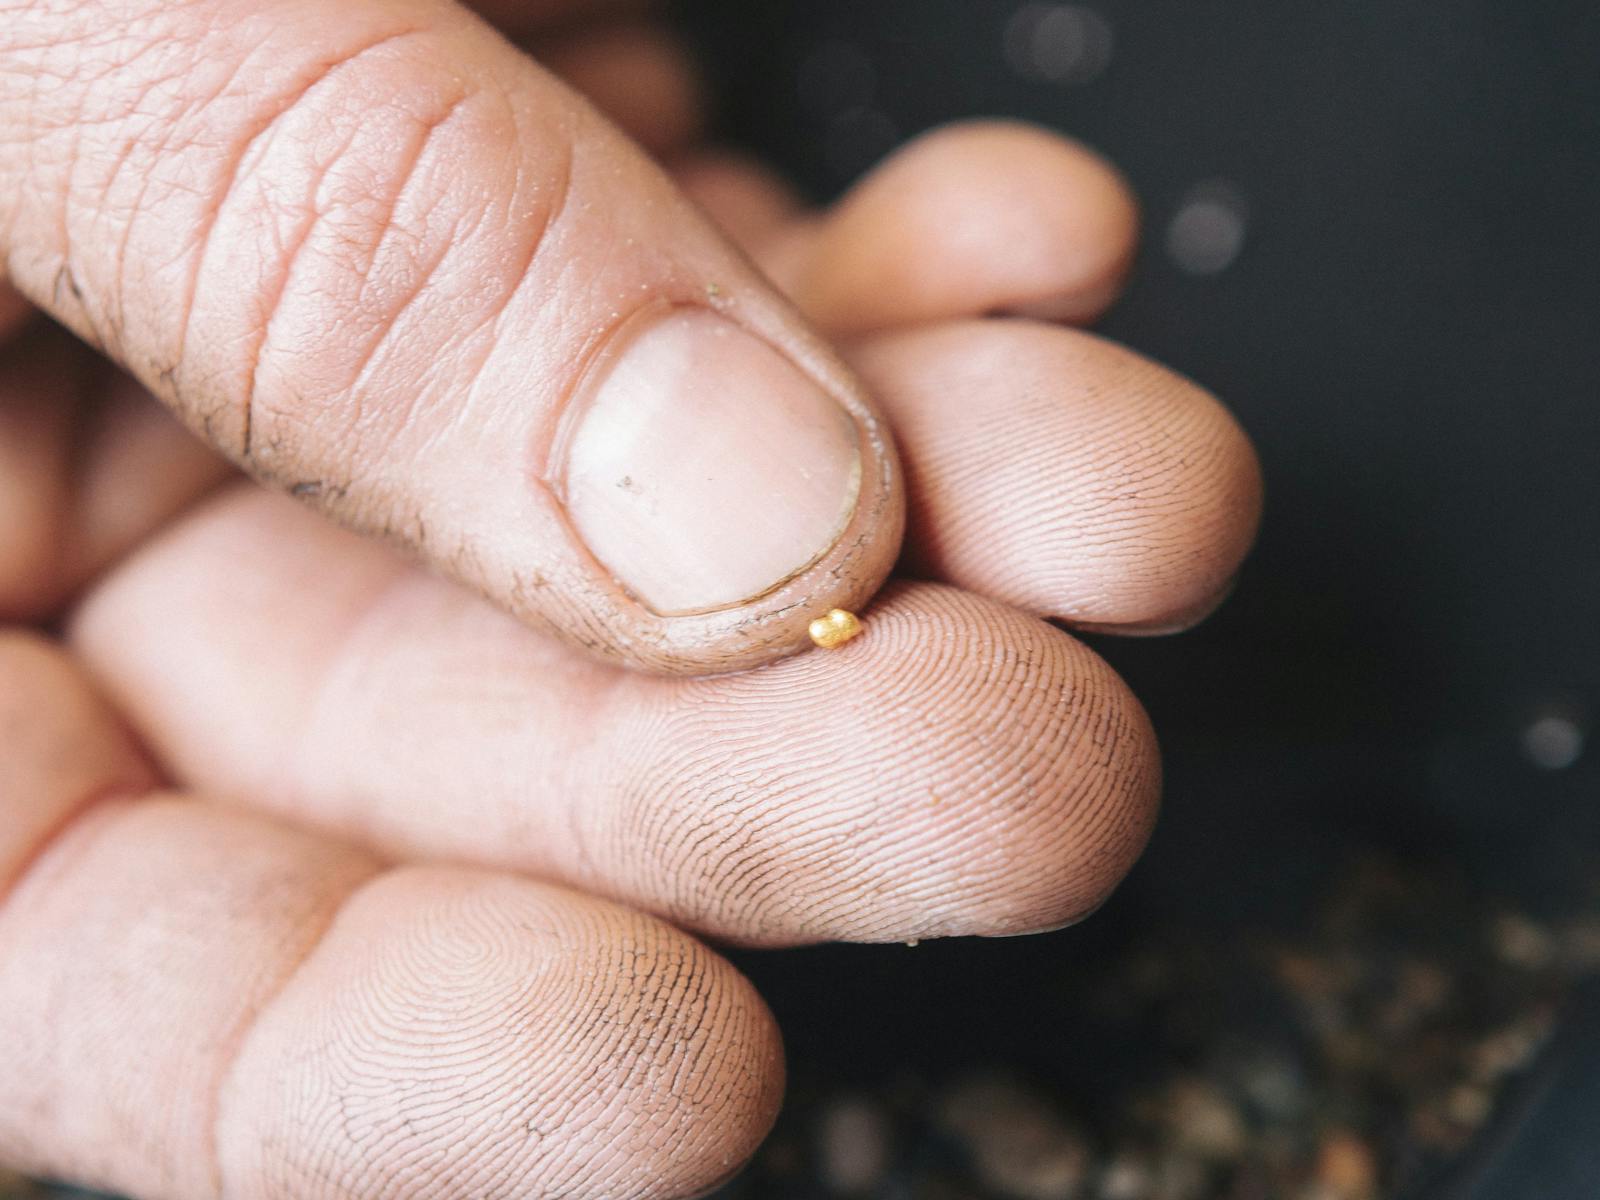 A single speck of gold is held by a dirty prospectors hand